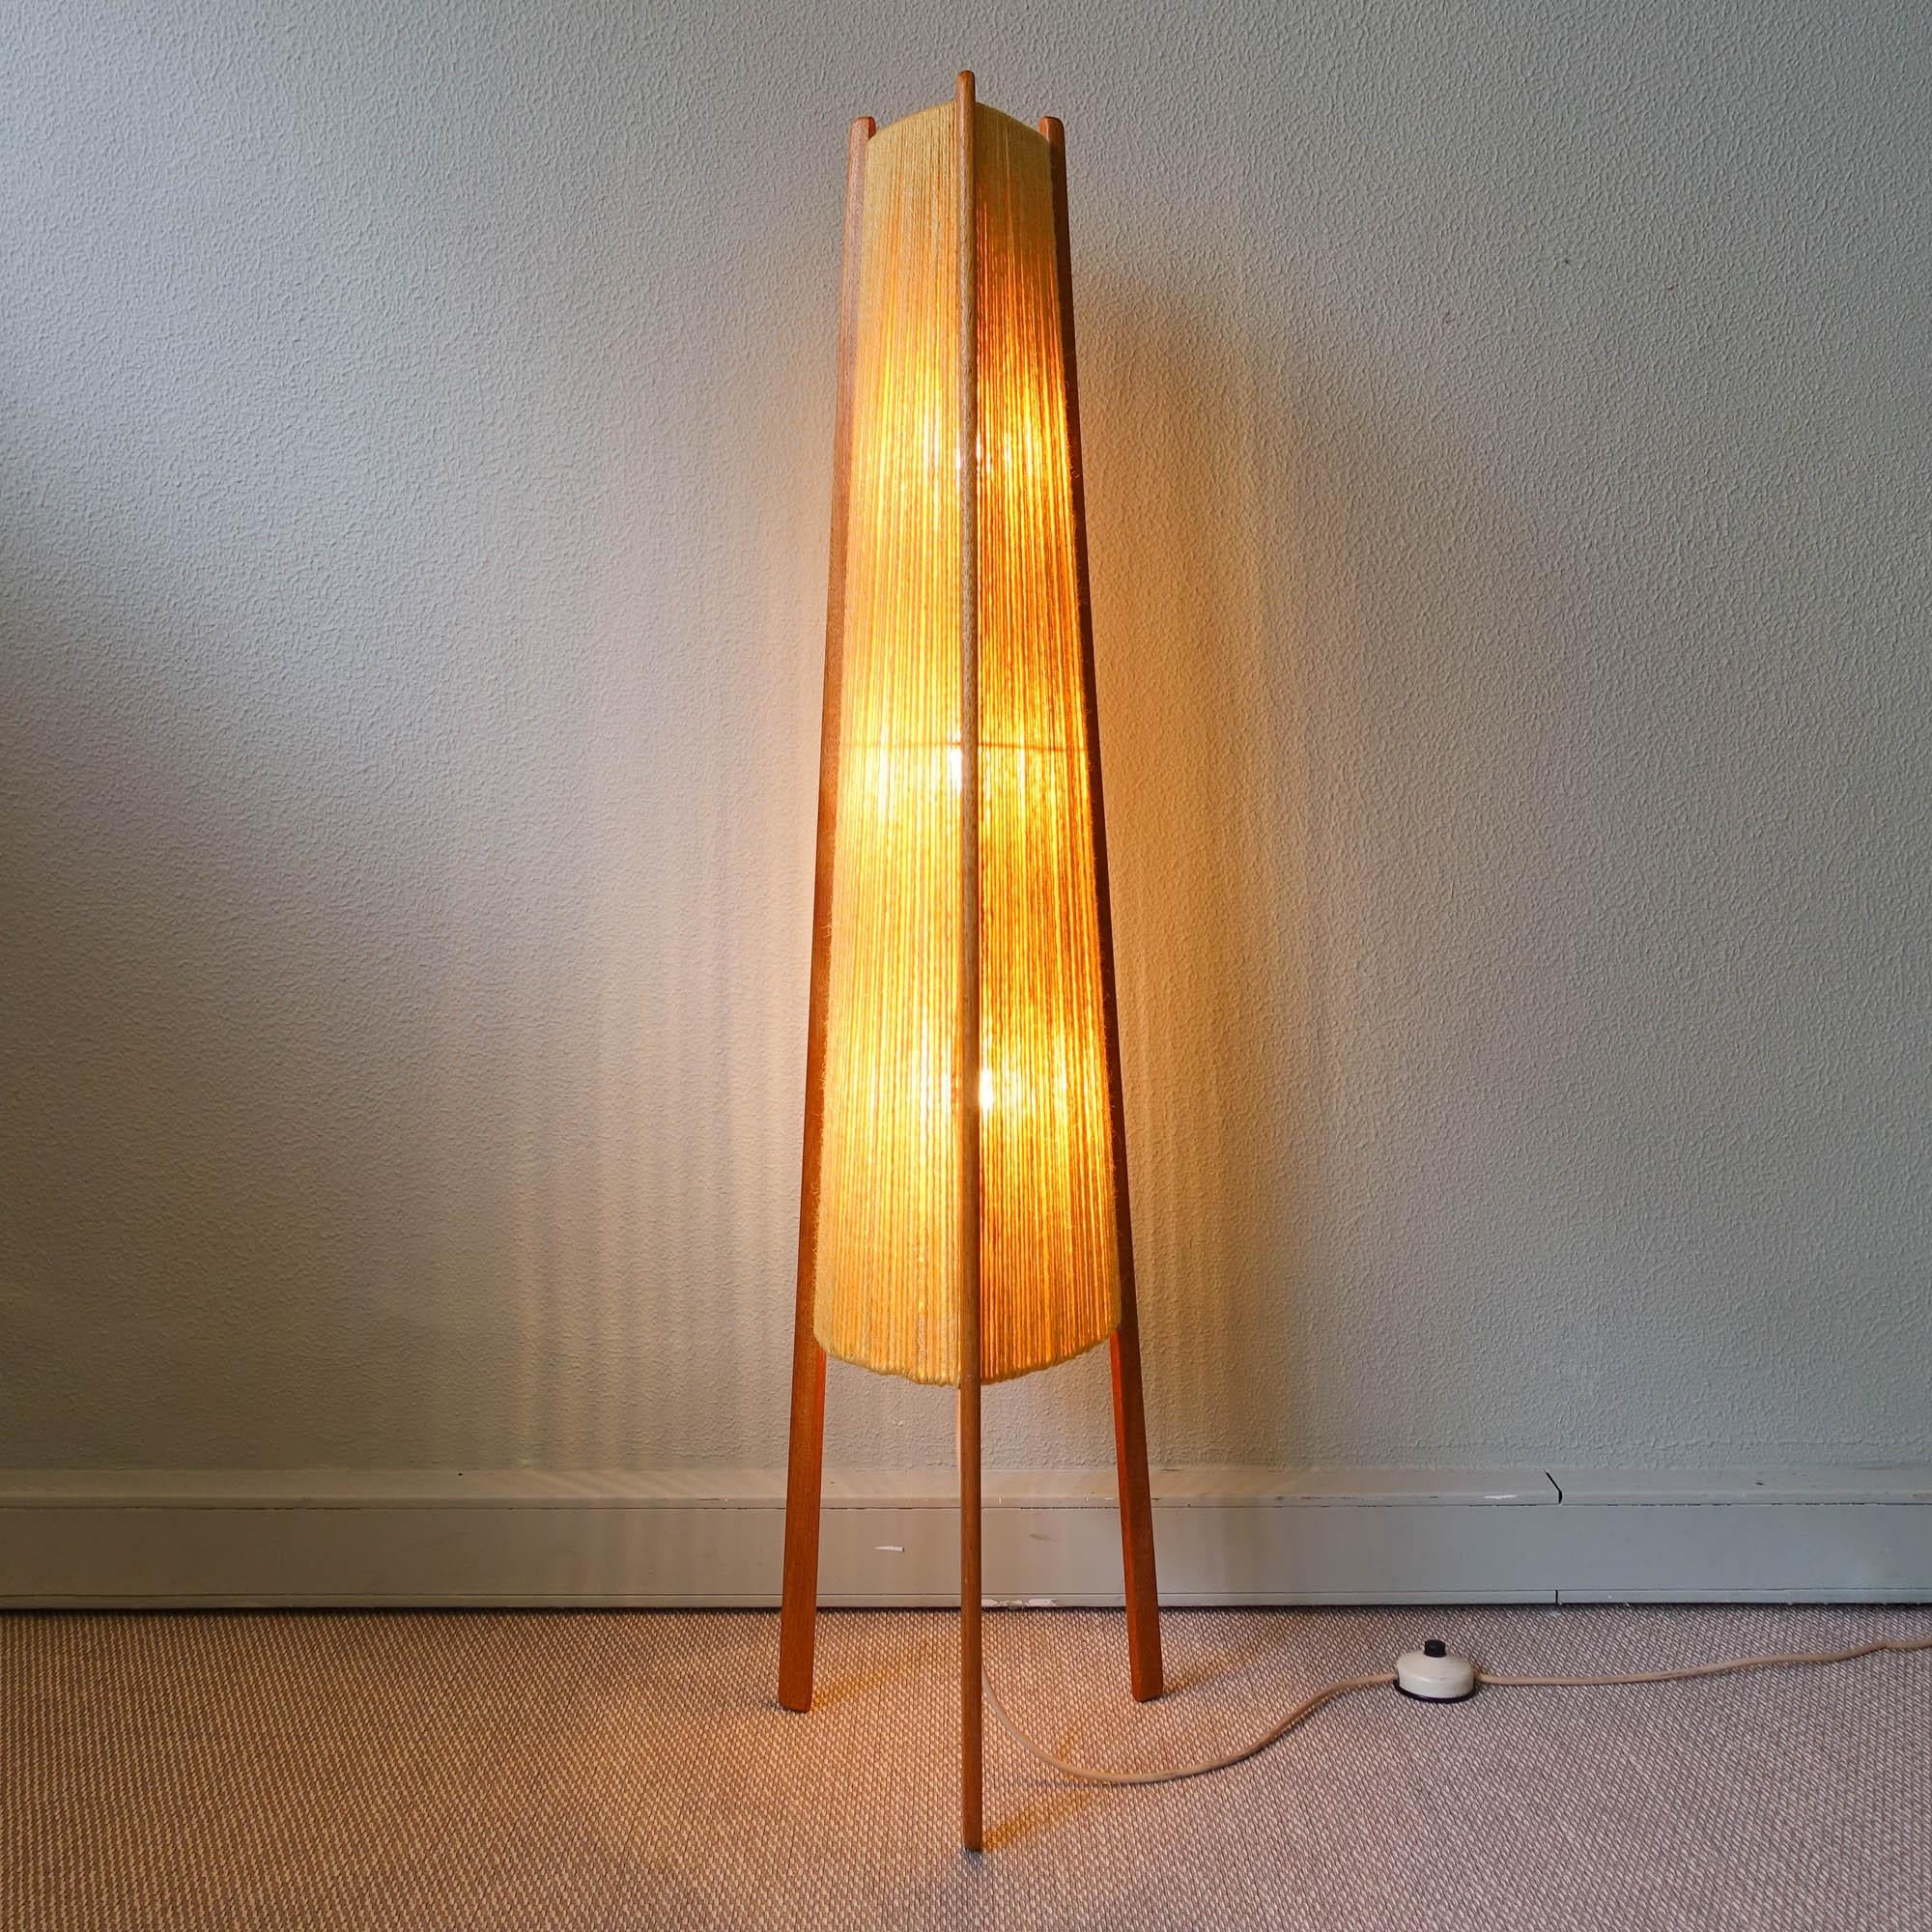 This floor lamp was designed and produced in Scandinavia during the 1960's. It features a structure with three teak legs that are screw to the lampshade. On the top is a teak handle that is hold on a brass stem that holds the 3 x E27 bulb sockets.